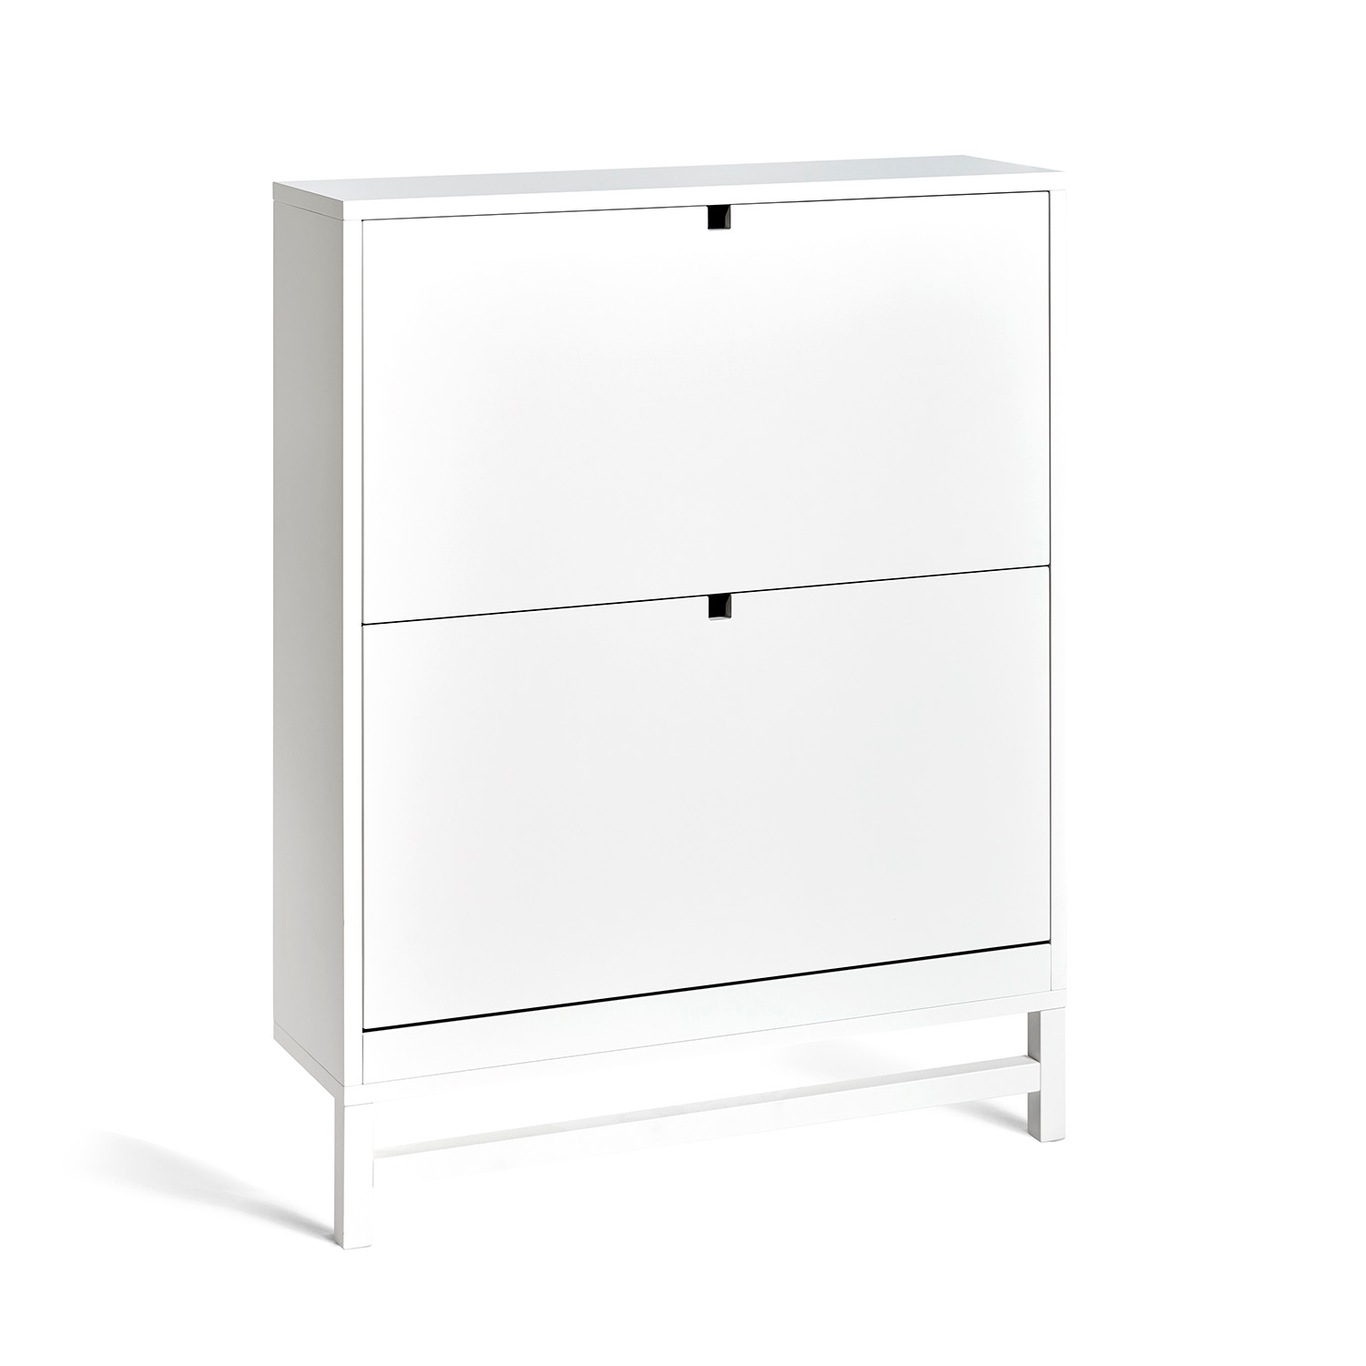 Falsterbo Shoe Cupboard, 2 Compartments, White Lacquer